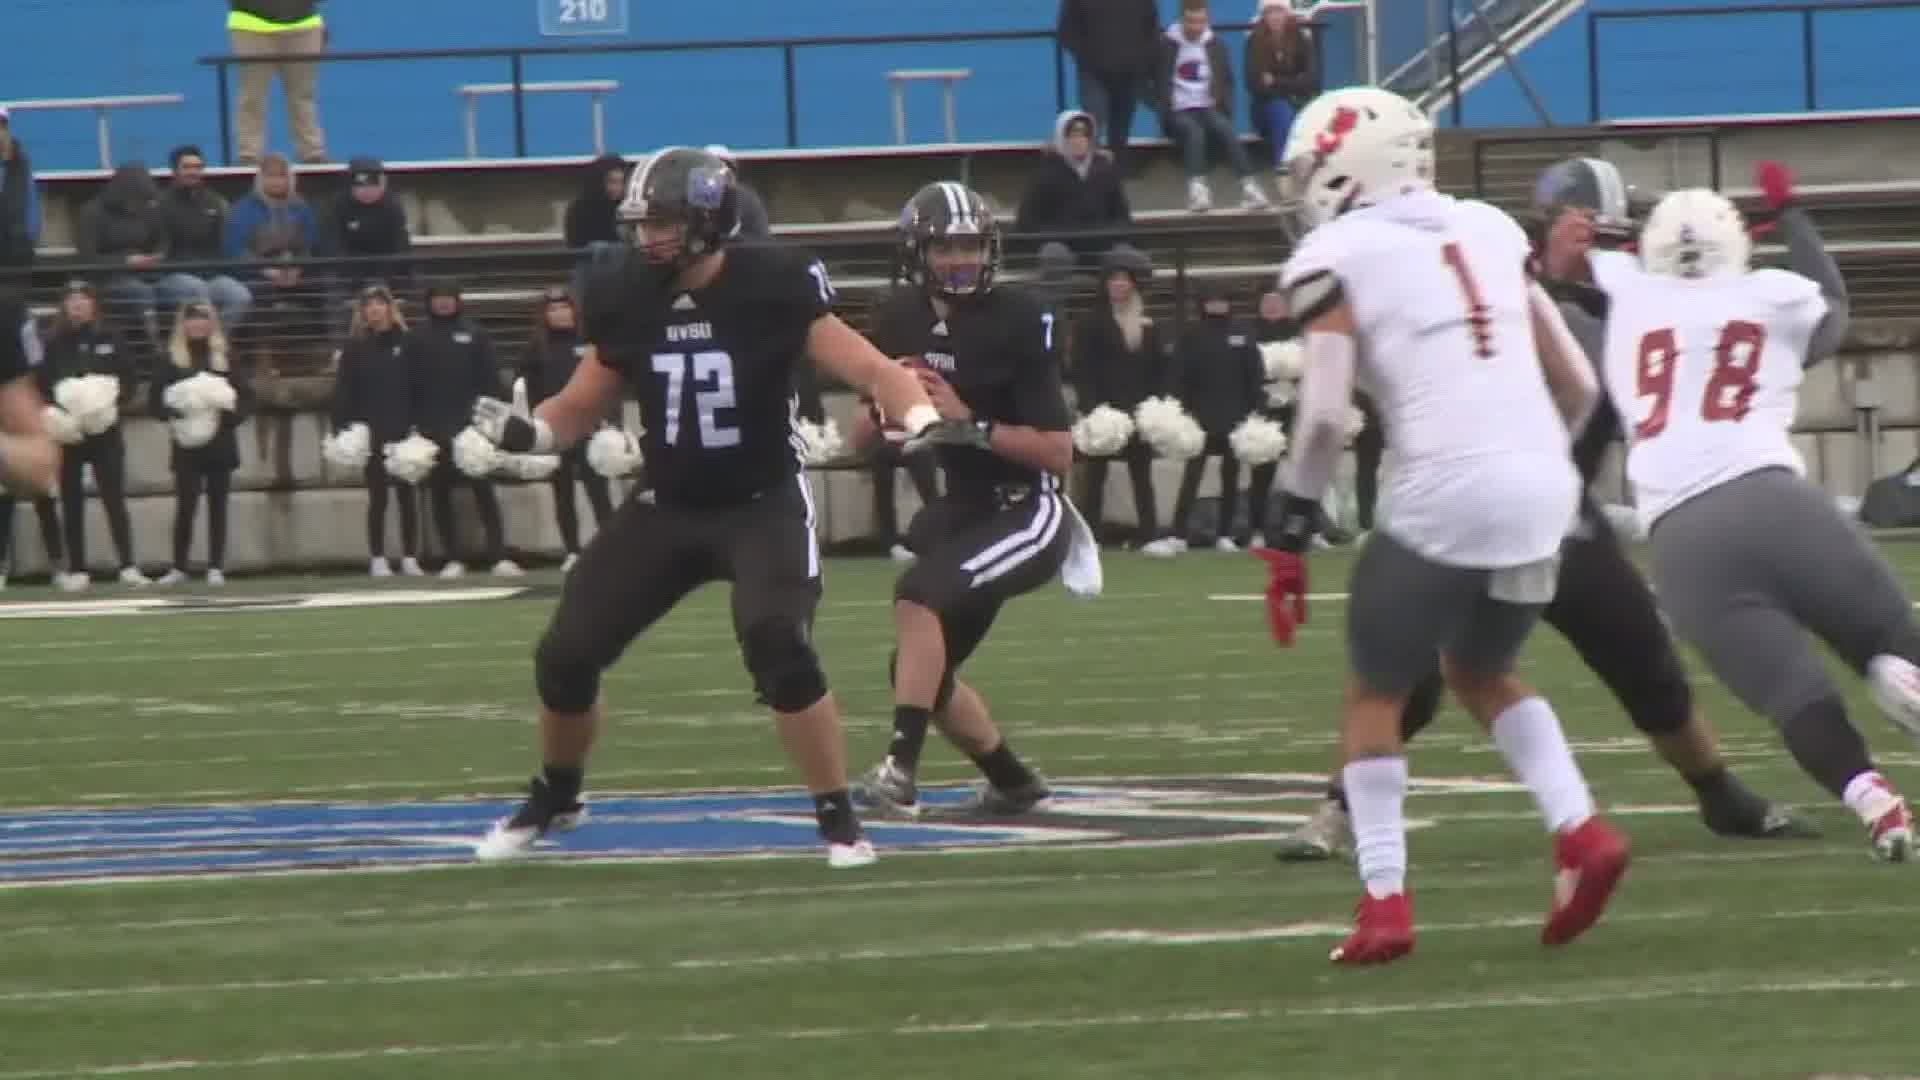 GVSU head football coach Matt Mitchell says the league's decision to play a conference only schedule is a sign they're still fighting for a season